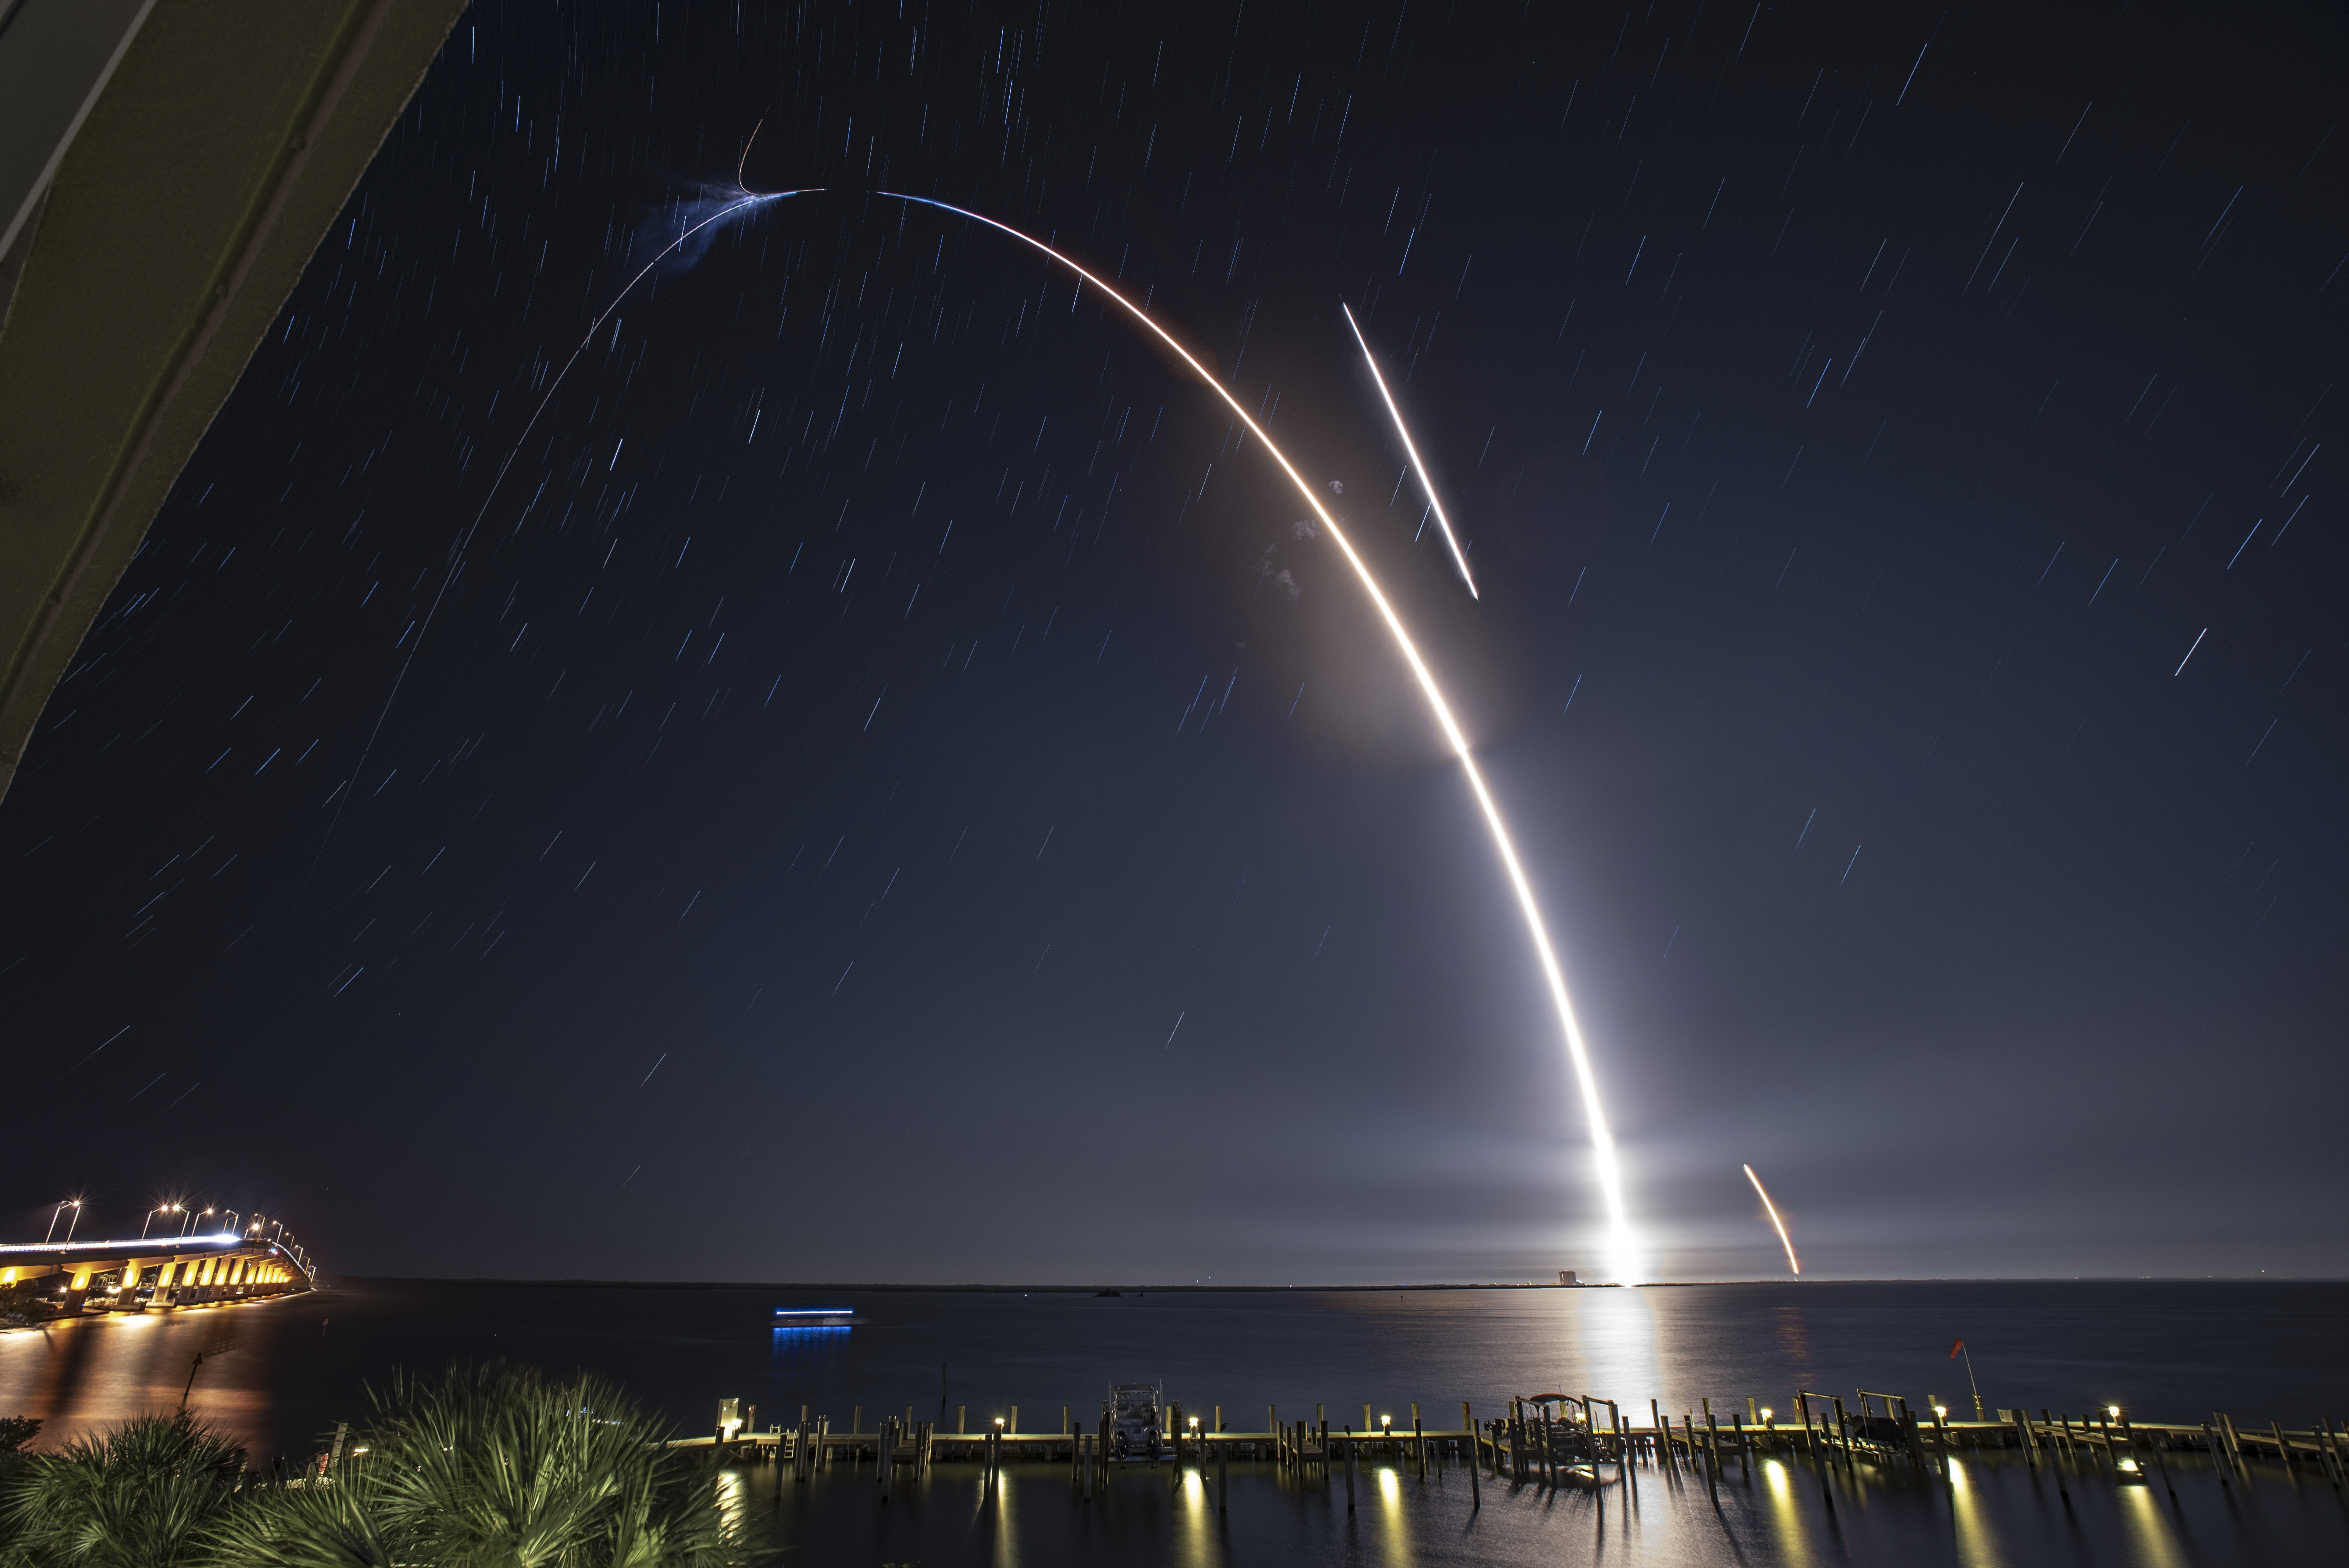 SpaceX satellites cause astronomers new headaches